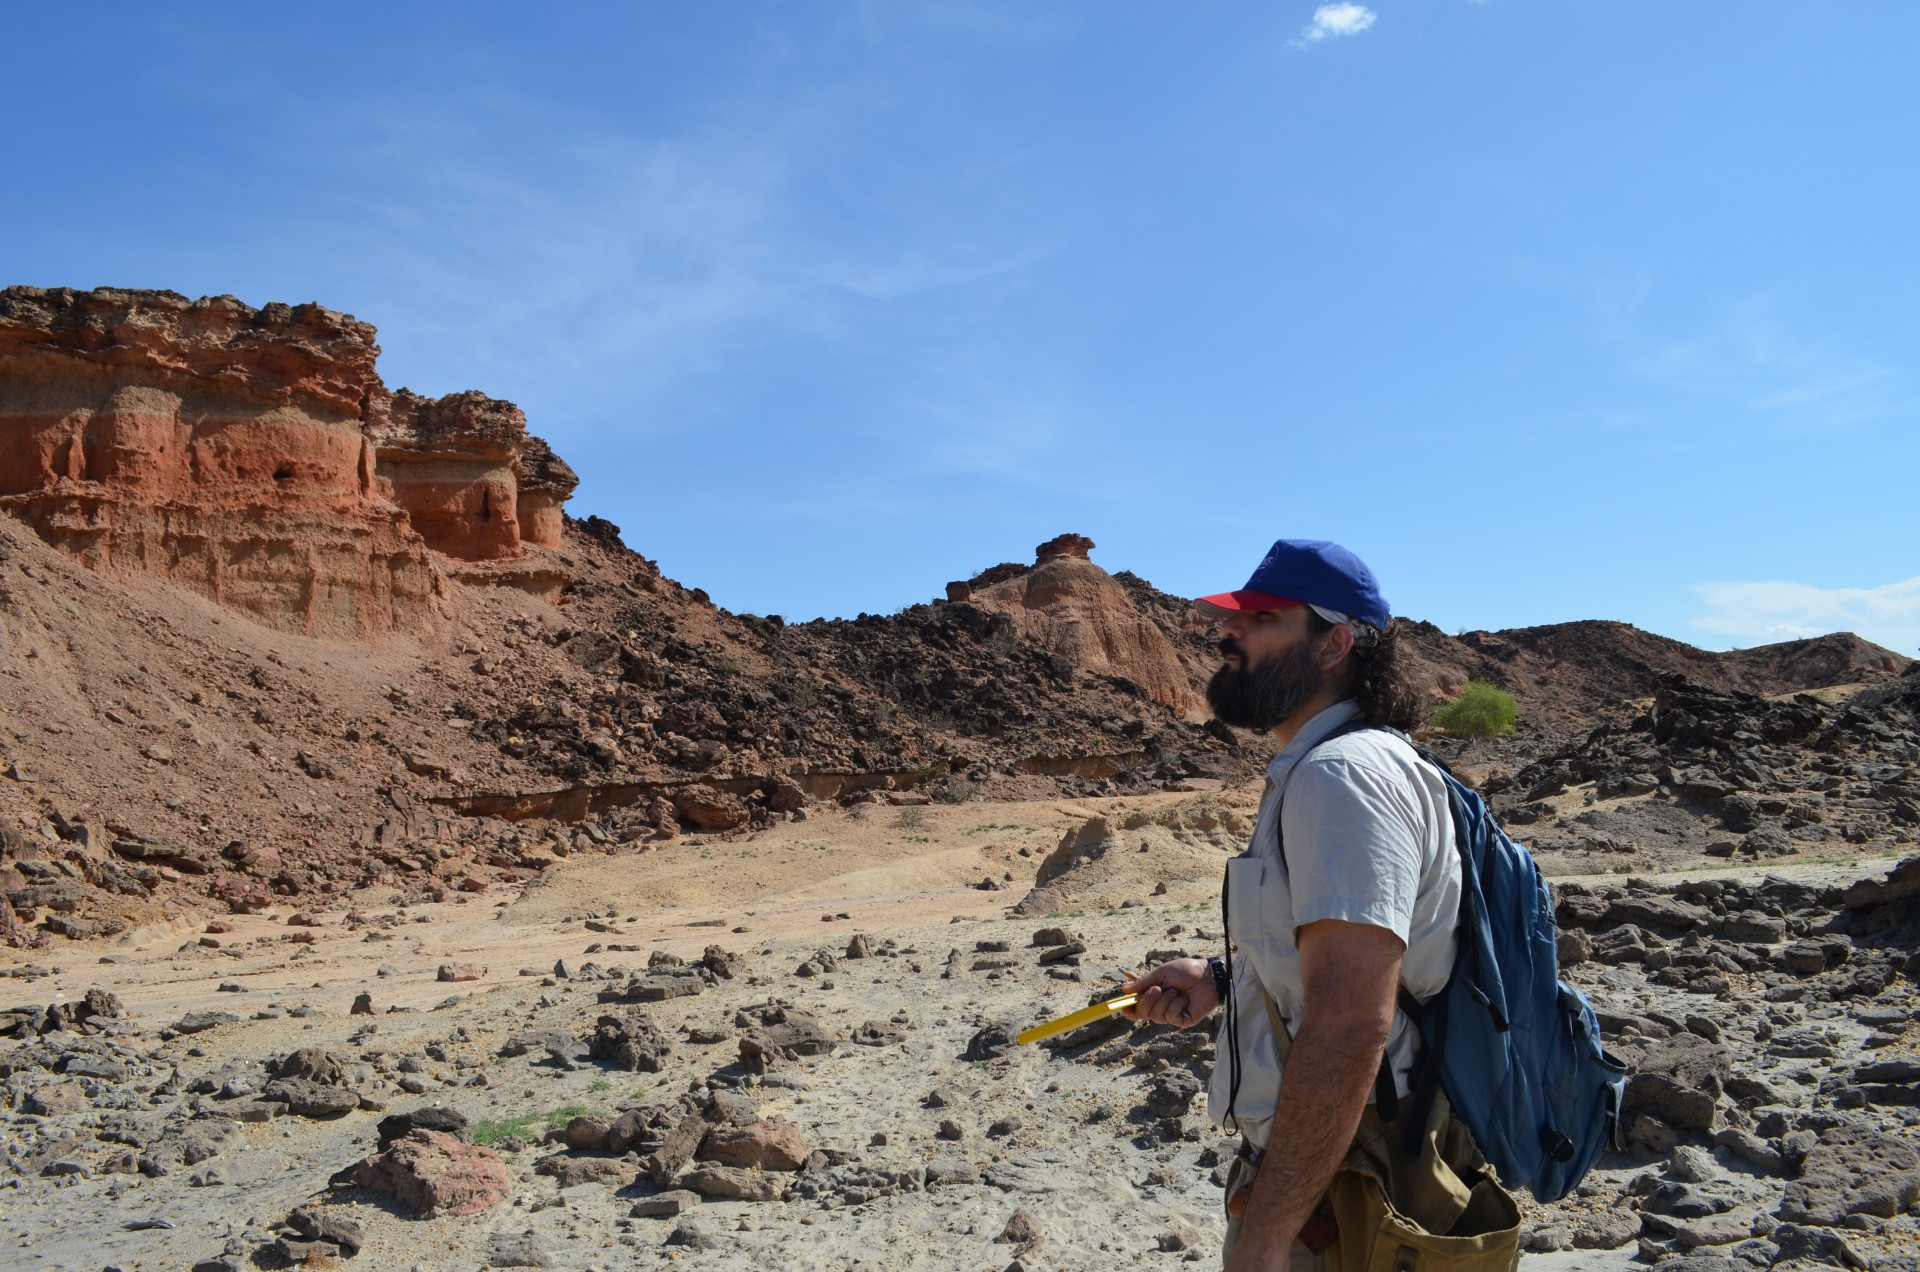 Geologist Christopher Lepre studies rocks in the Turkana region of northwest Kenya, where many of the most important fossils and artifacts from early humans are found.